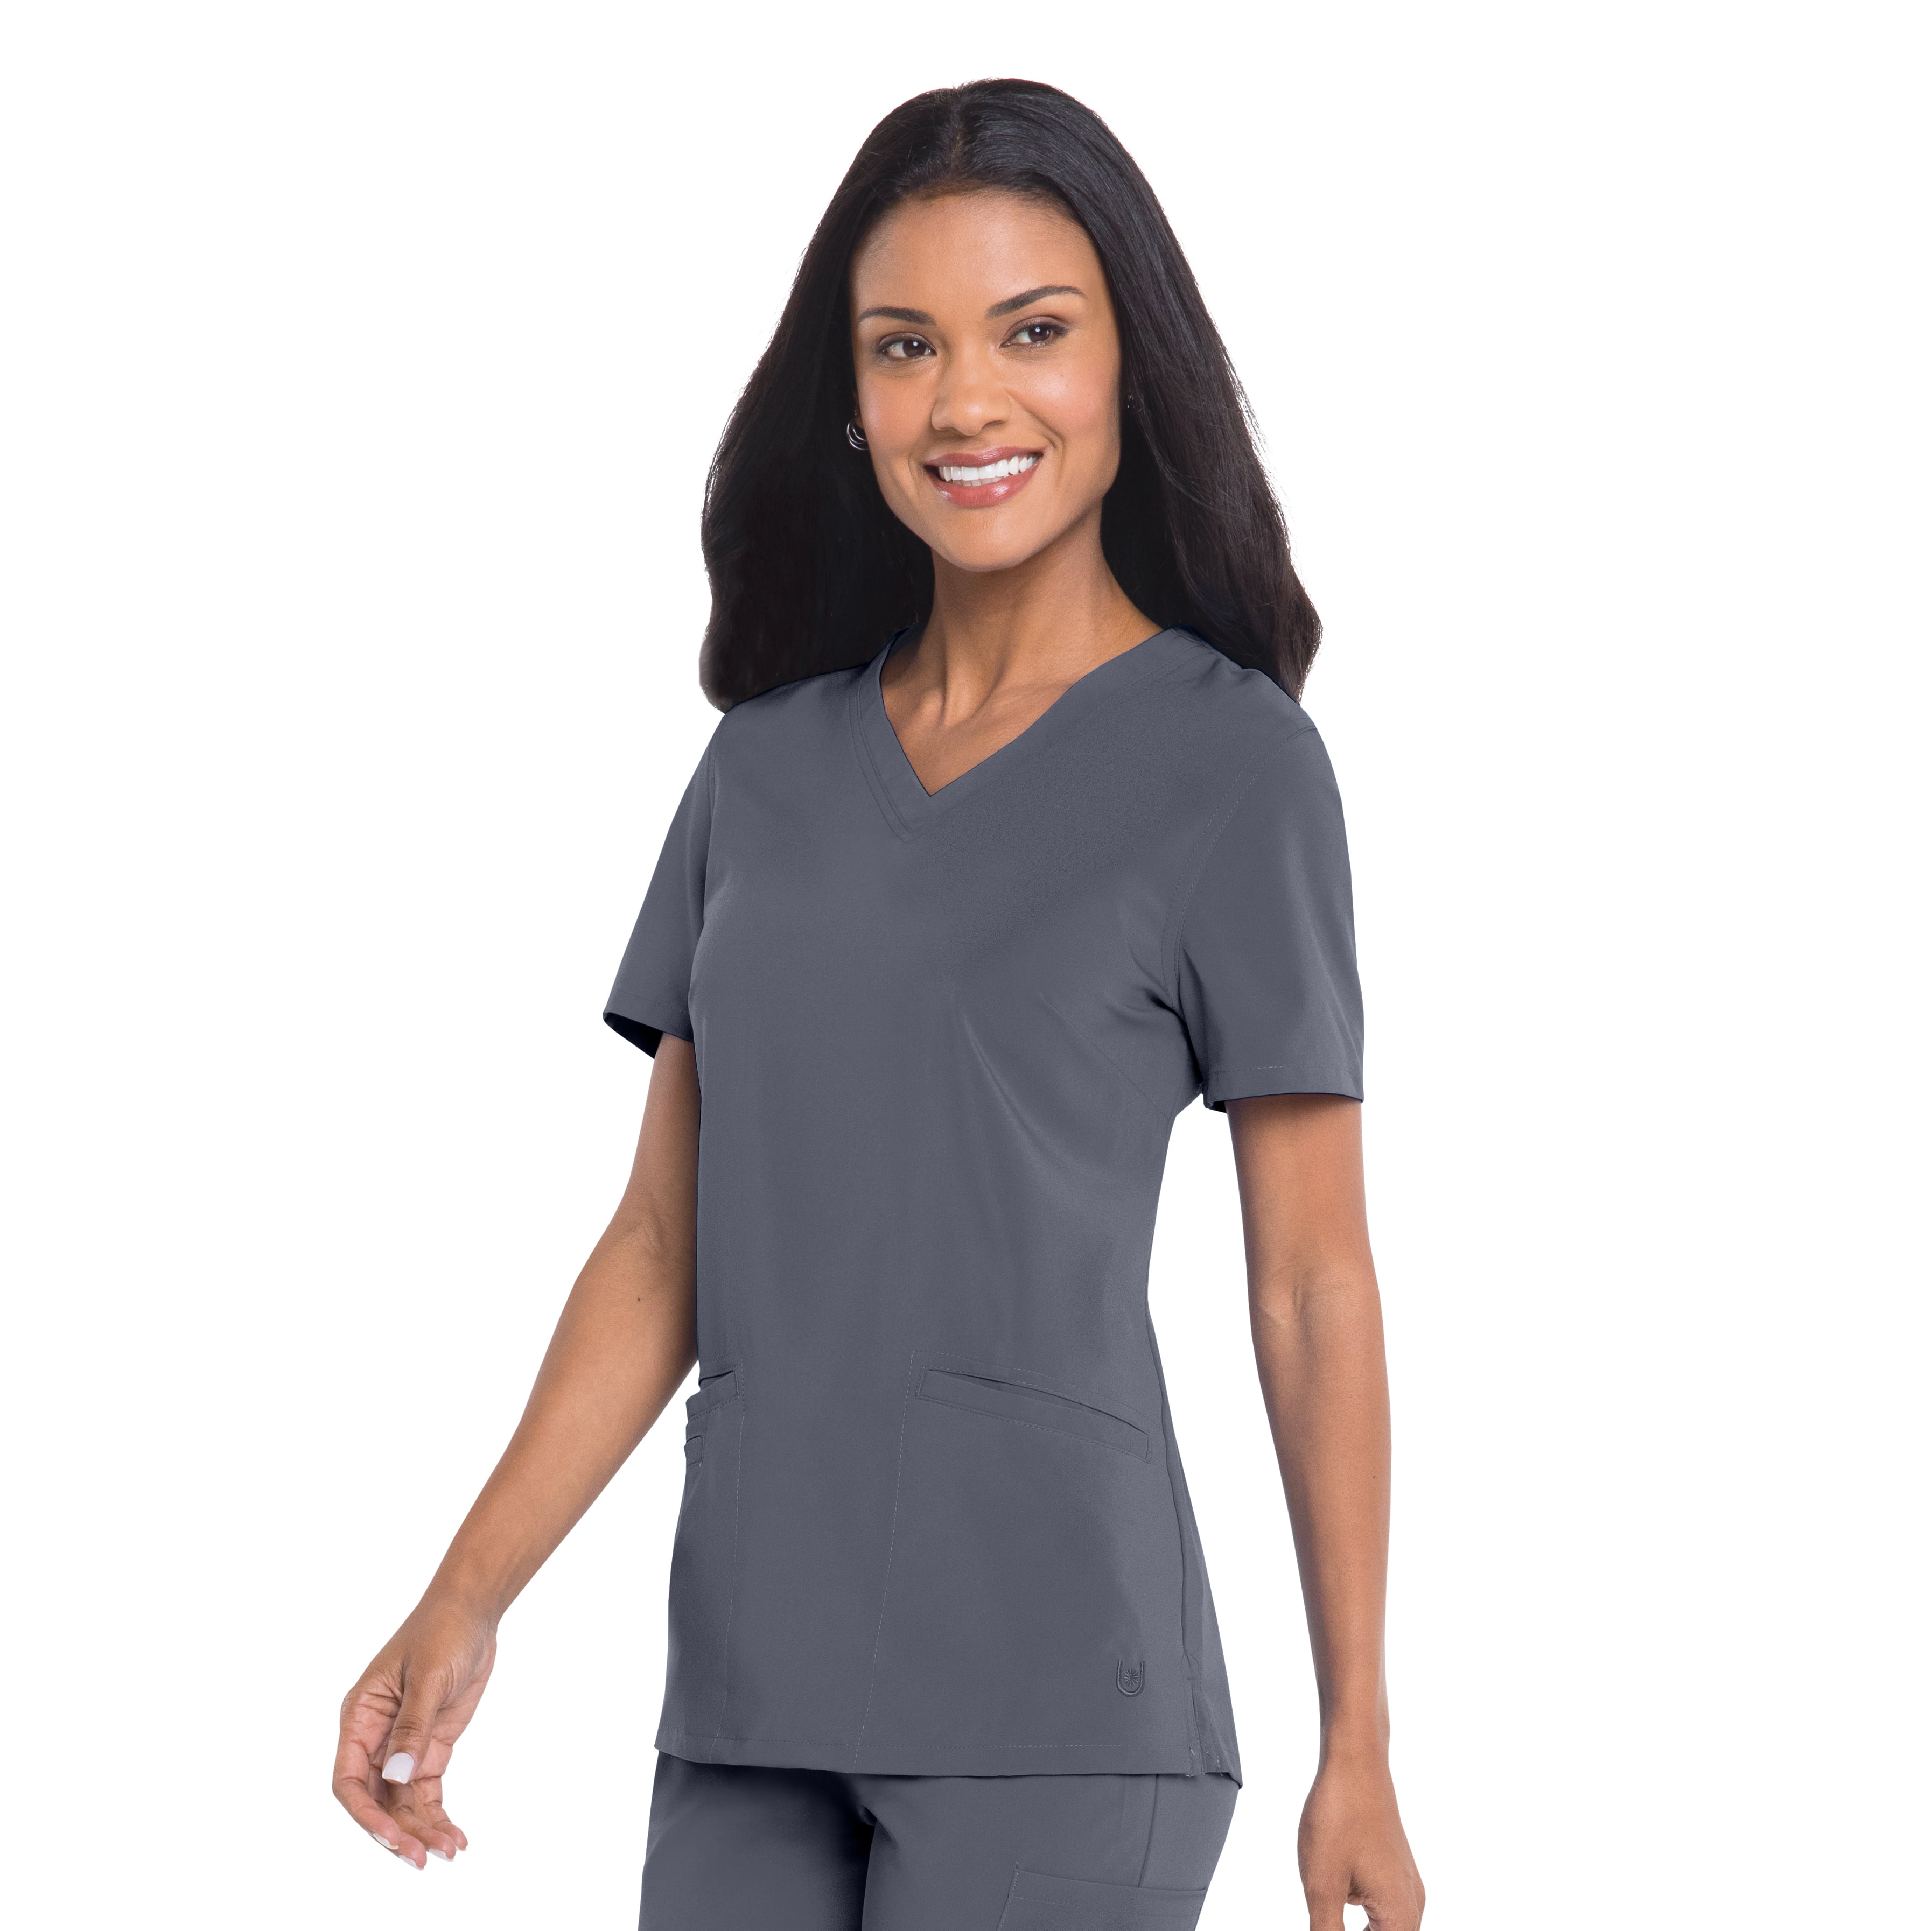 Urbane Performance Tailored Fit Super Stretch Top for 9015 Women Scrub 3-Pocket